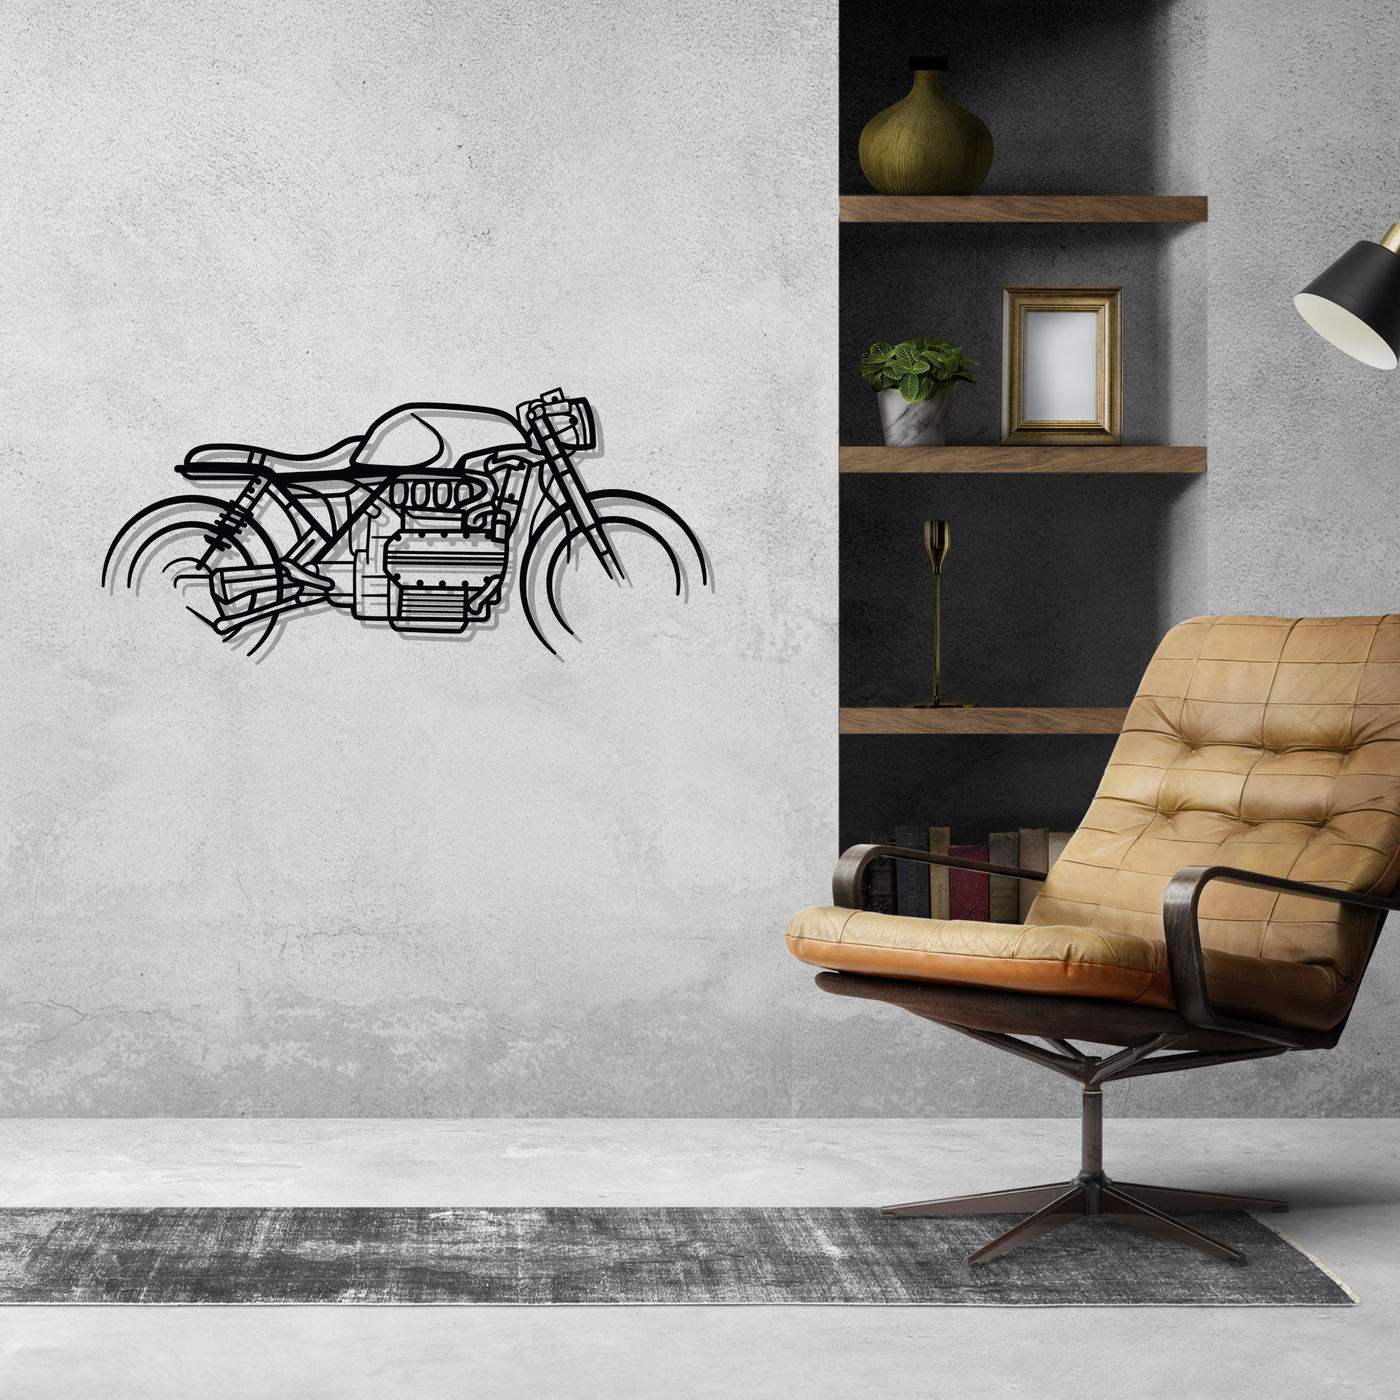 K1100 Cafe Racer Metal Silhouette Wall Art Active